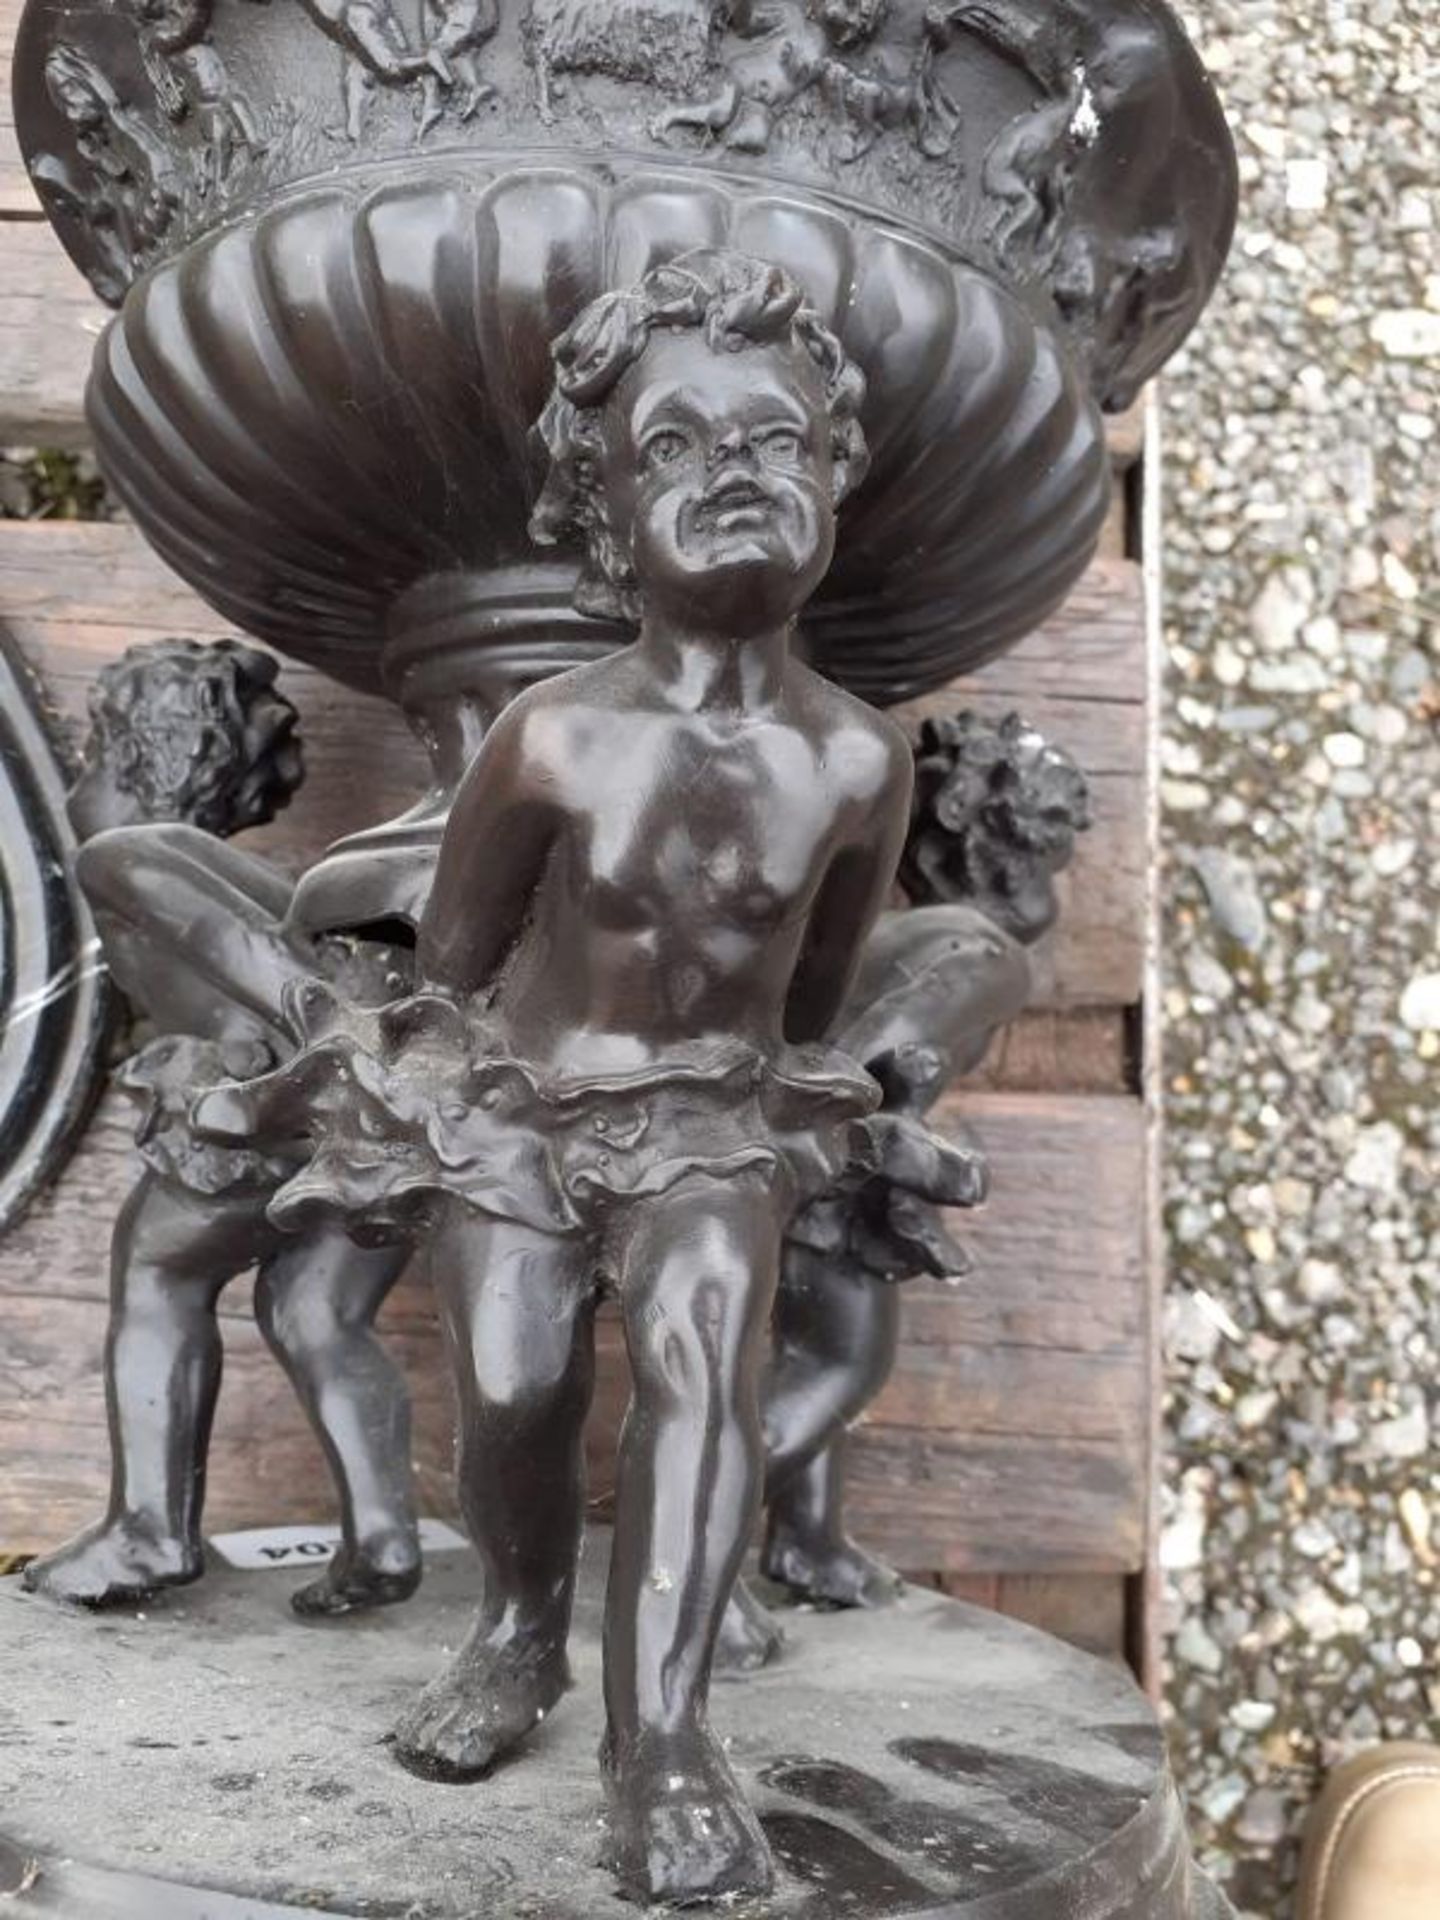 1 x Large Table Statue / Sculpture Of 3 Cherubs Carrying A Planter In Black Metal With Marble / Gran - Image 5 of 10